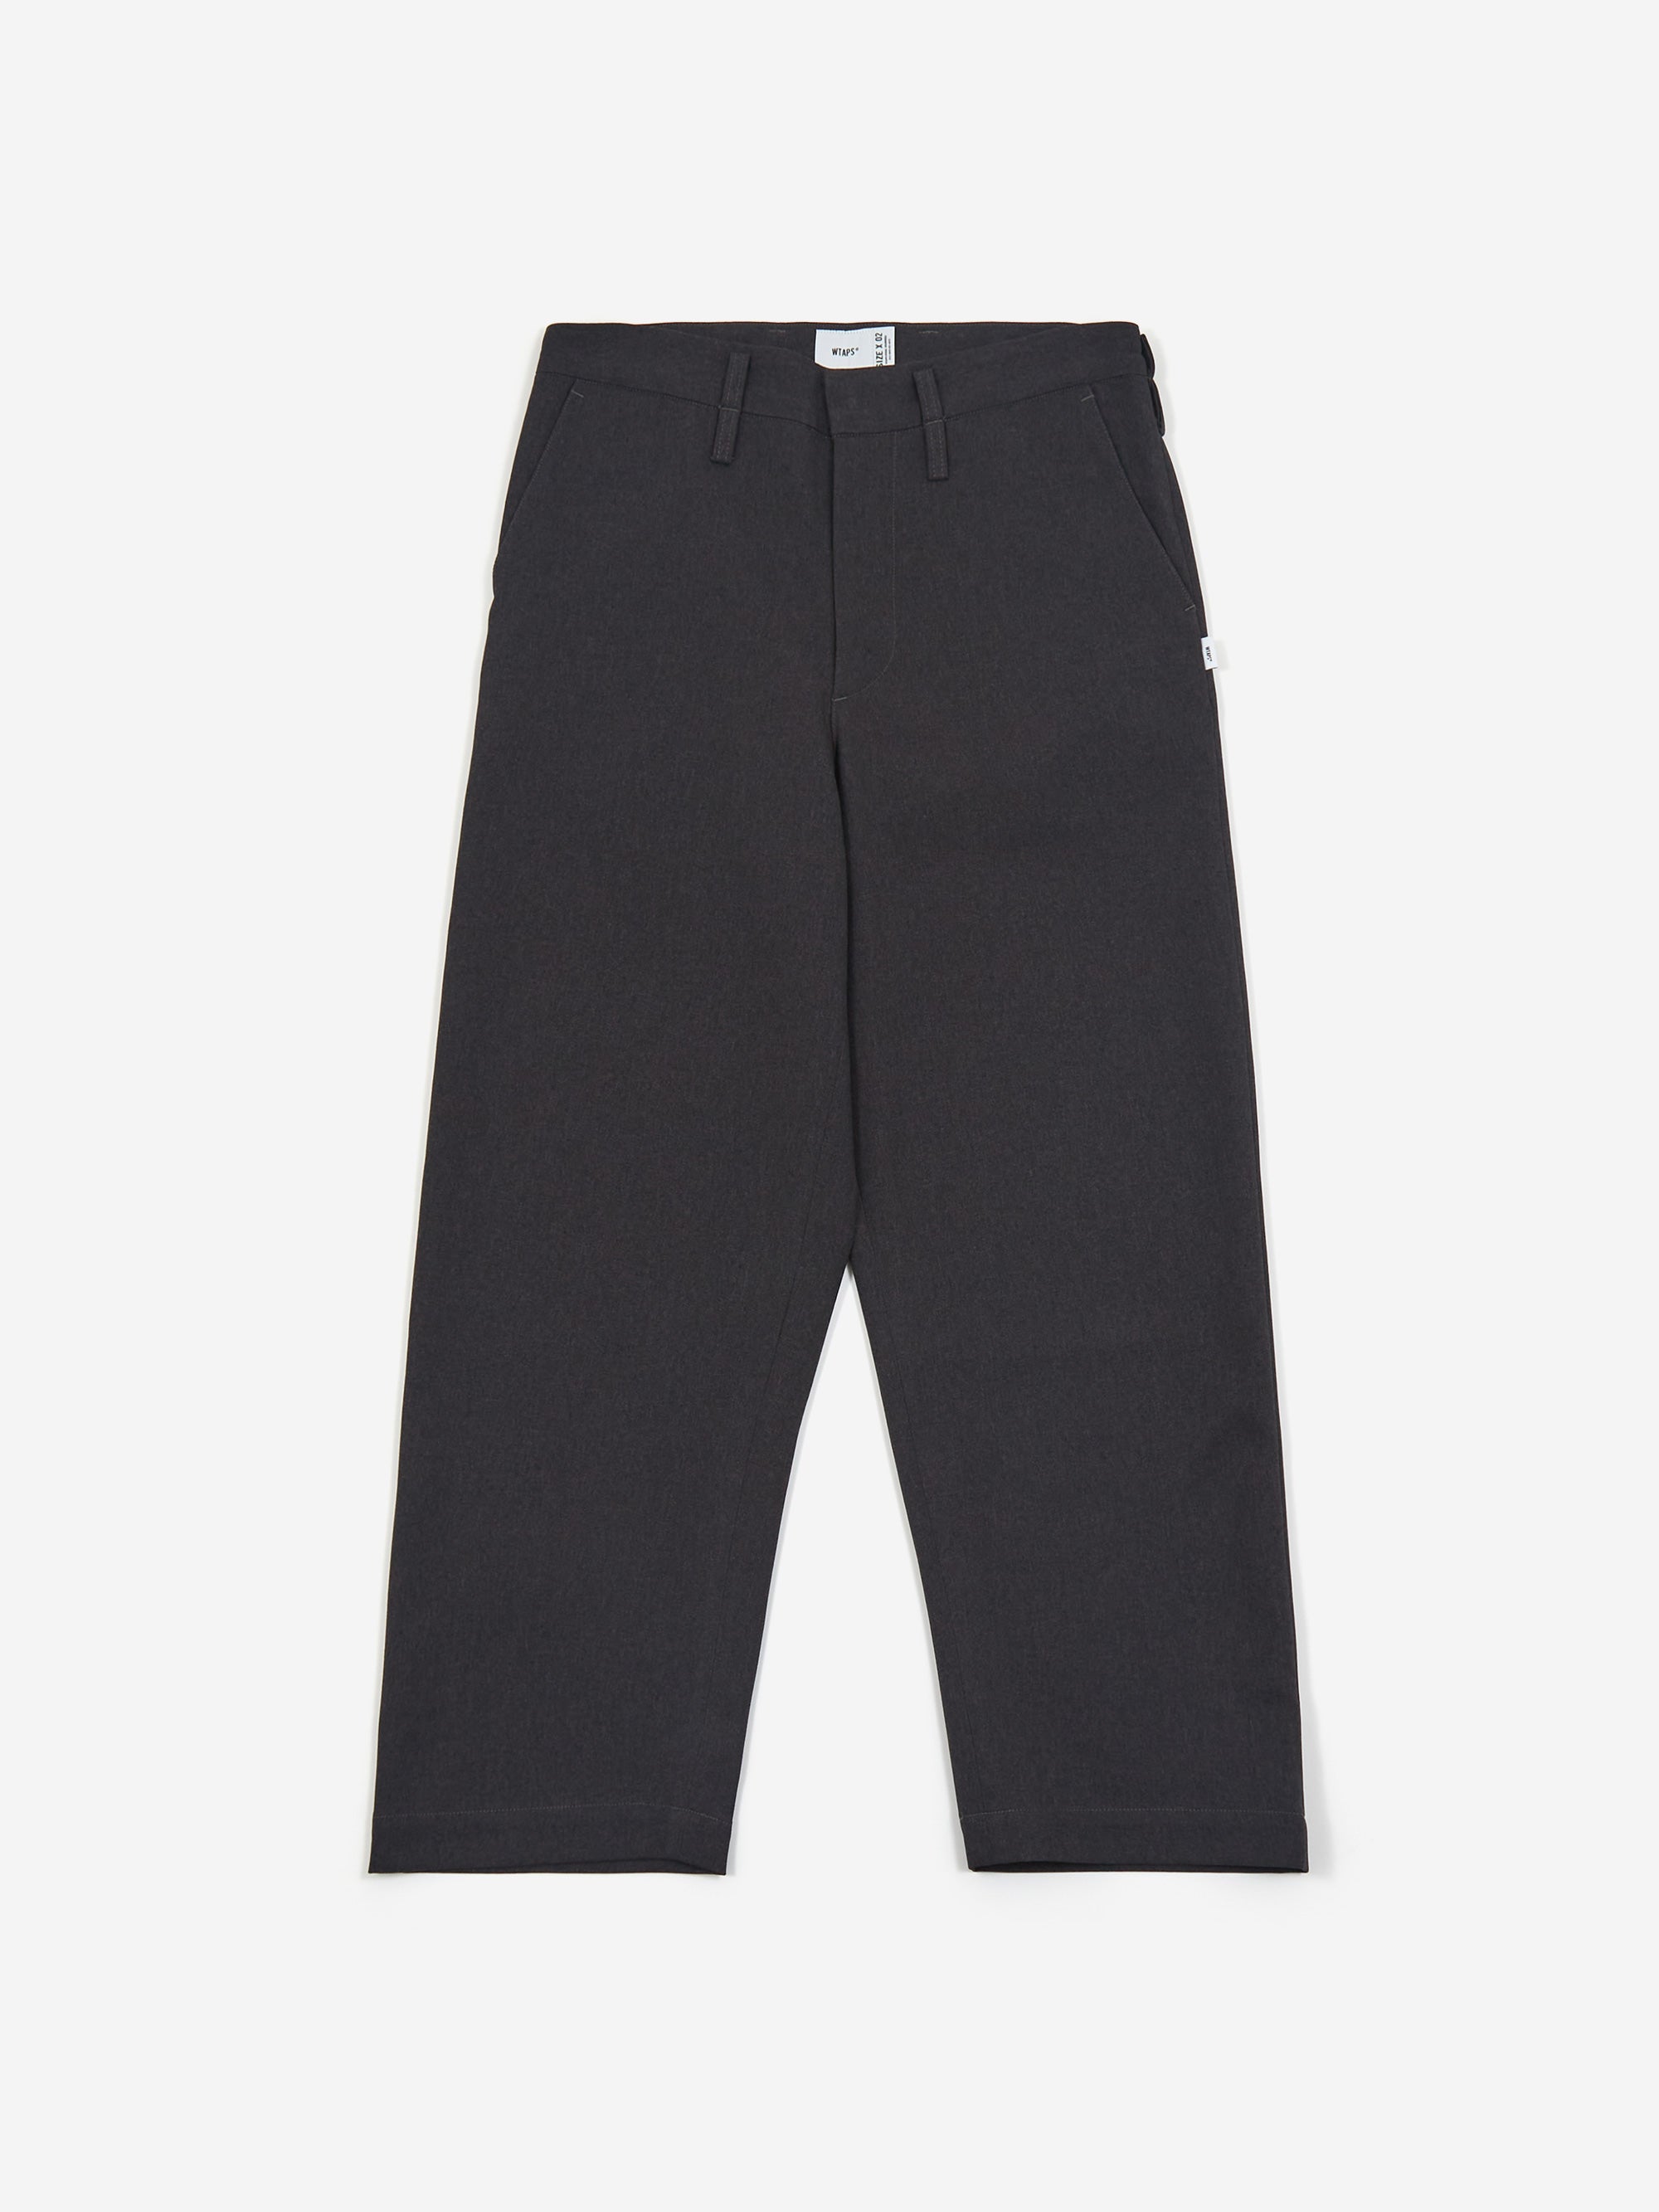 Wtaps Trdt2301 / Trousers / Poly. Twill.ダブルタップスT 